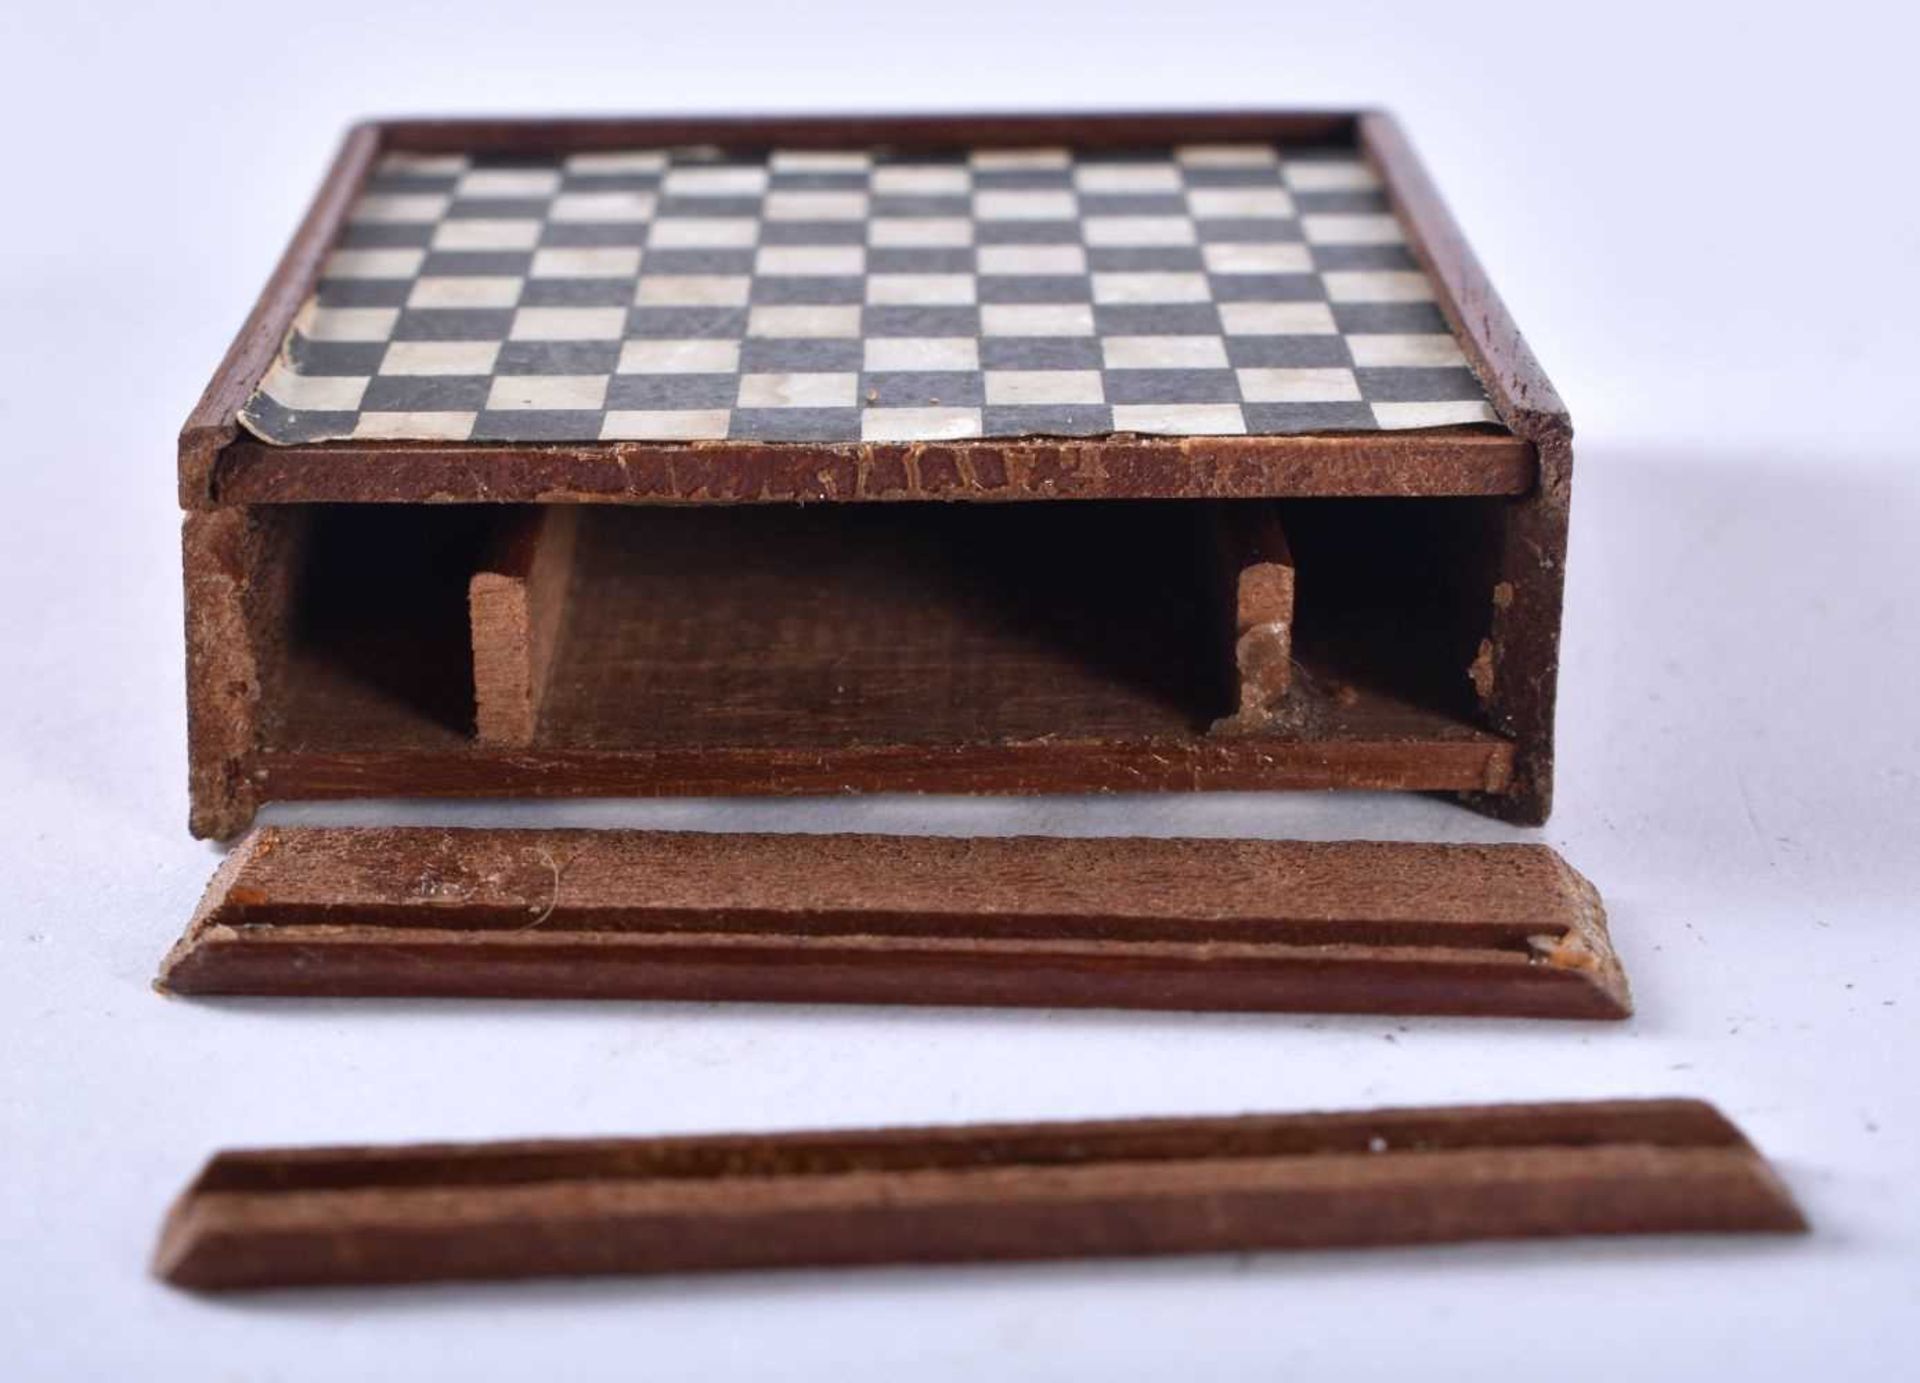 A MINIATURE GAMING BOARD. 5.5 cm square. - Image 3 of 4